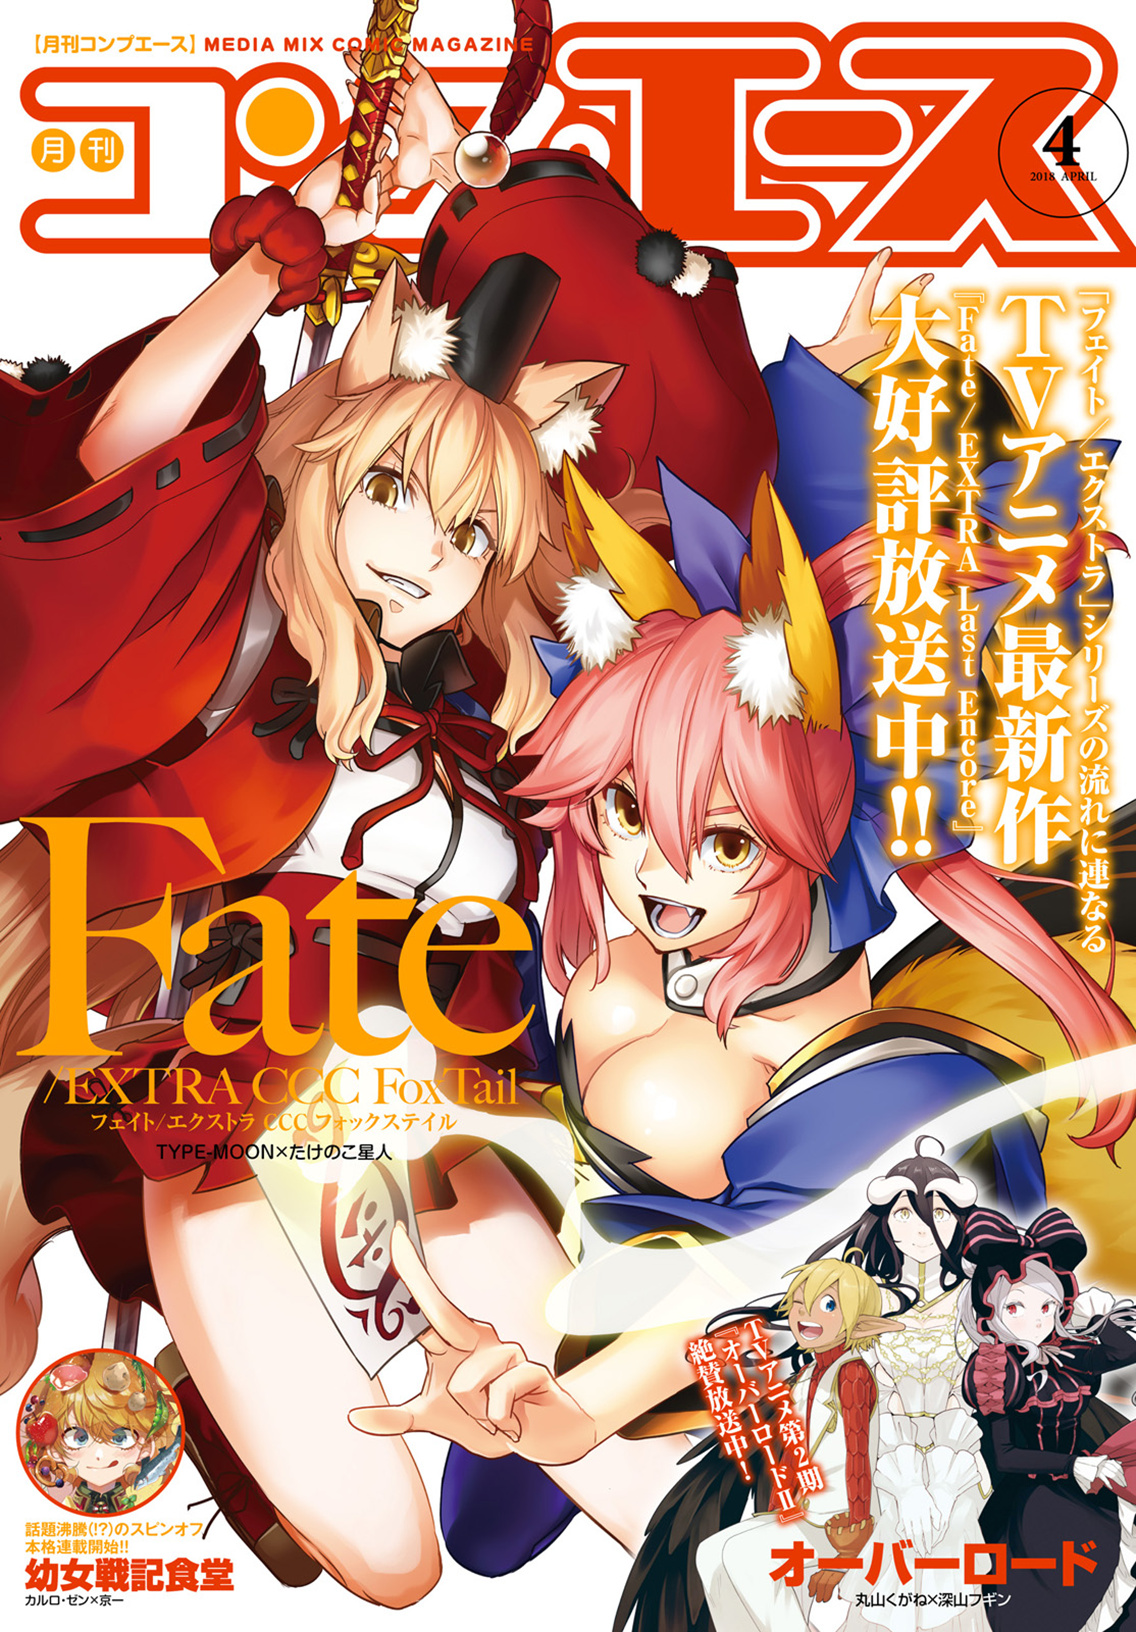 Fate/extra Ccc - Foxtail Chapter 45 #1